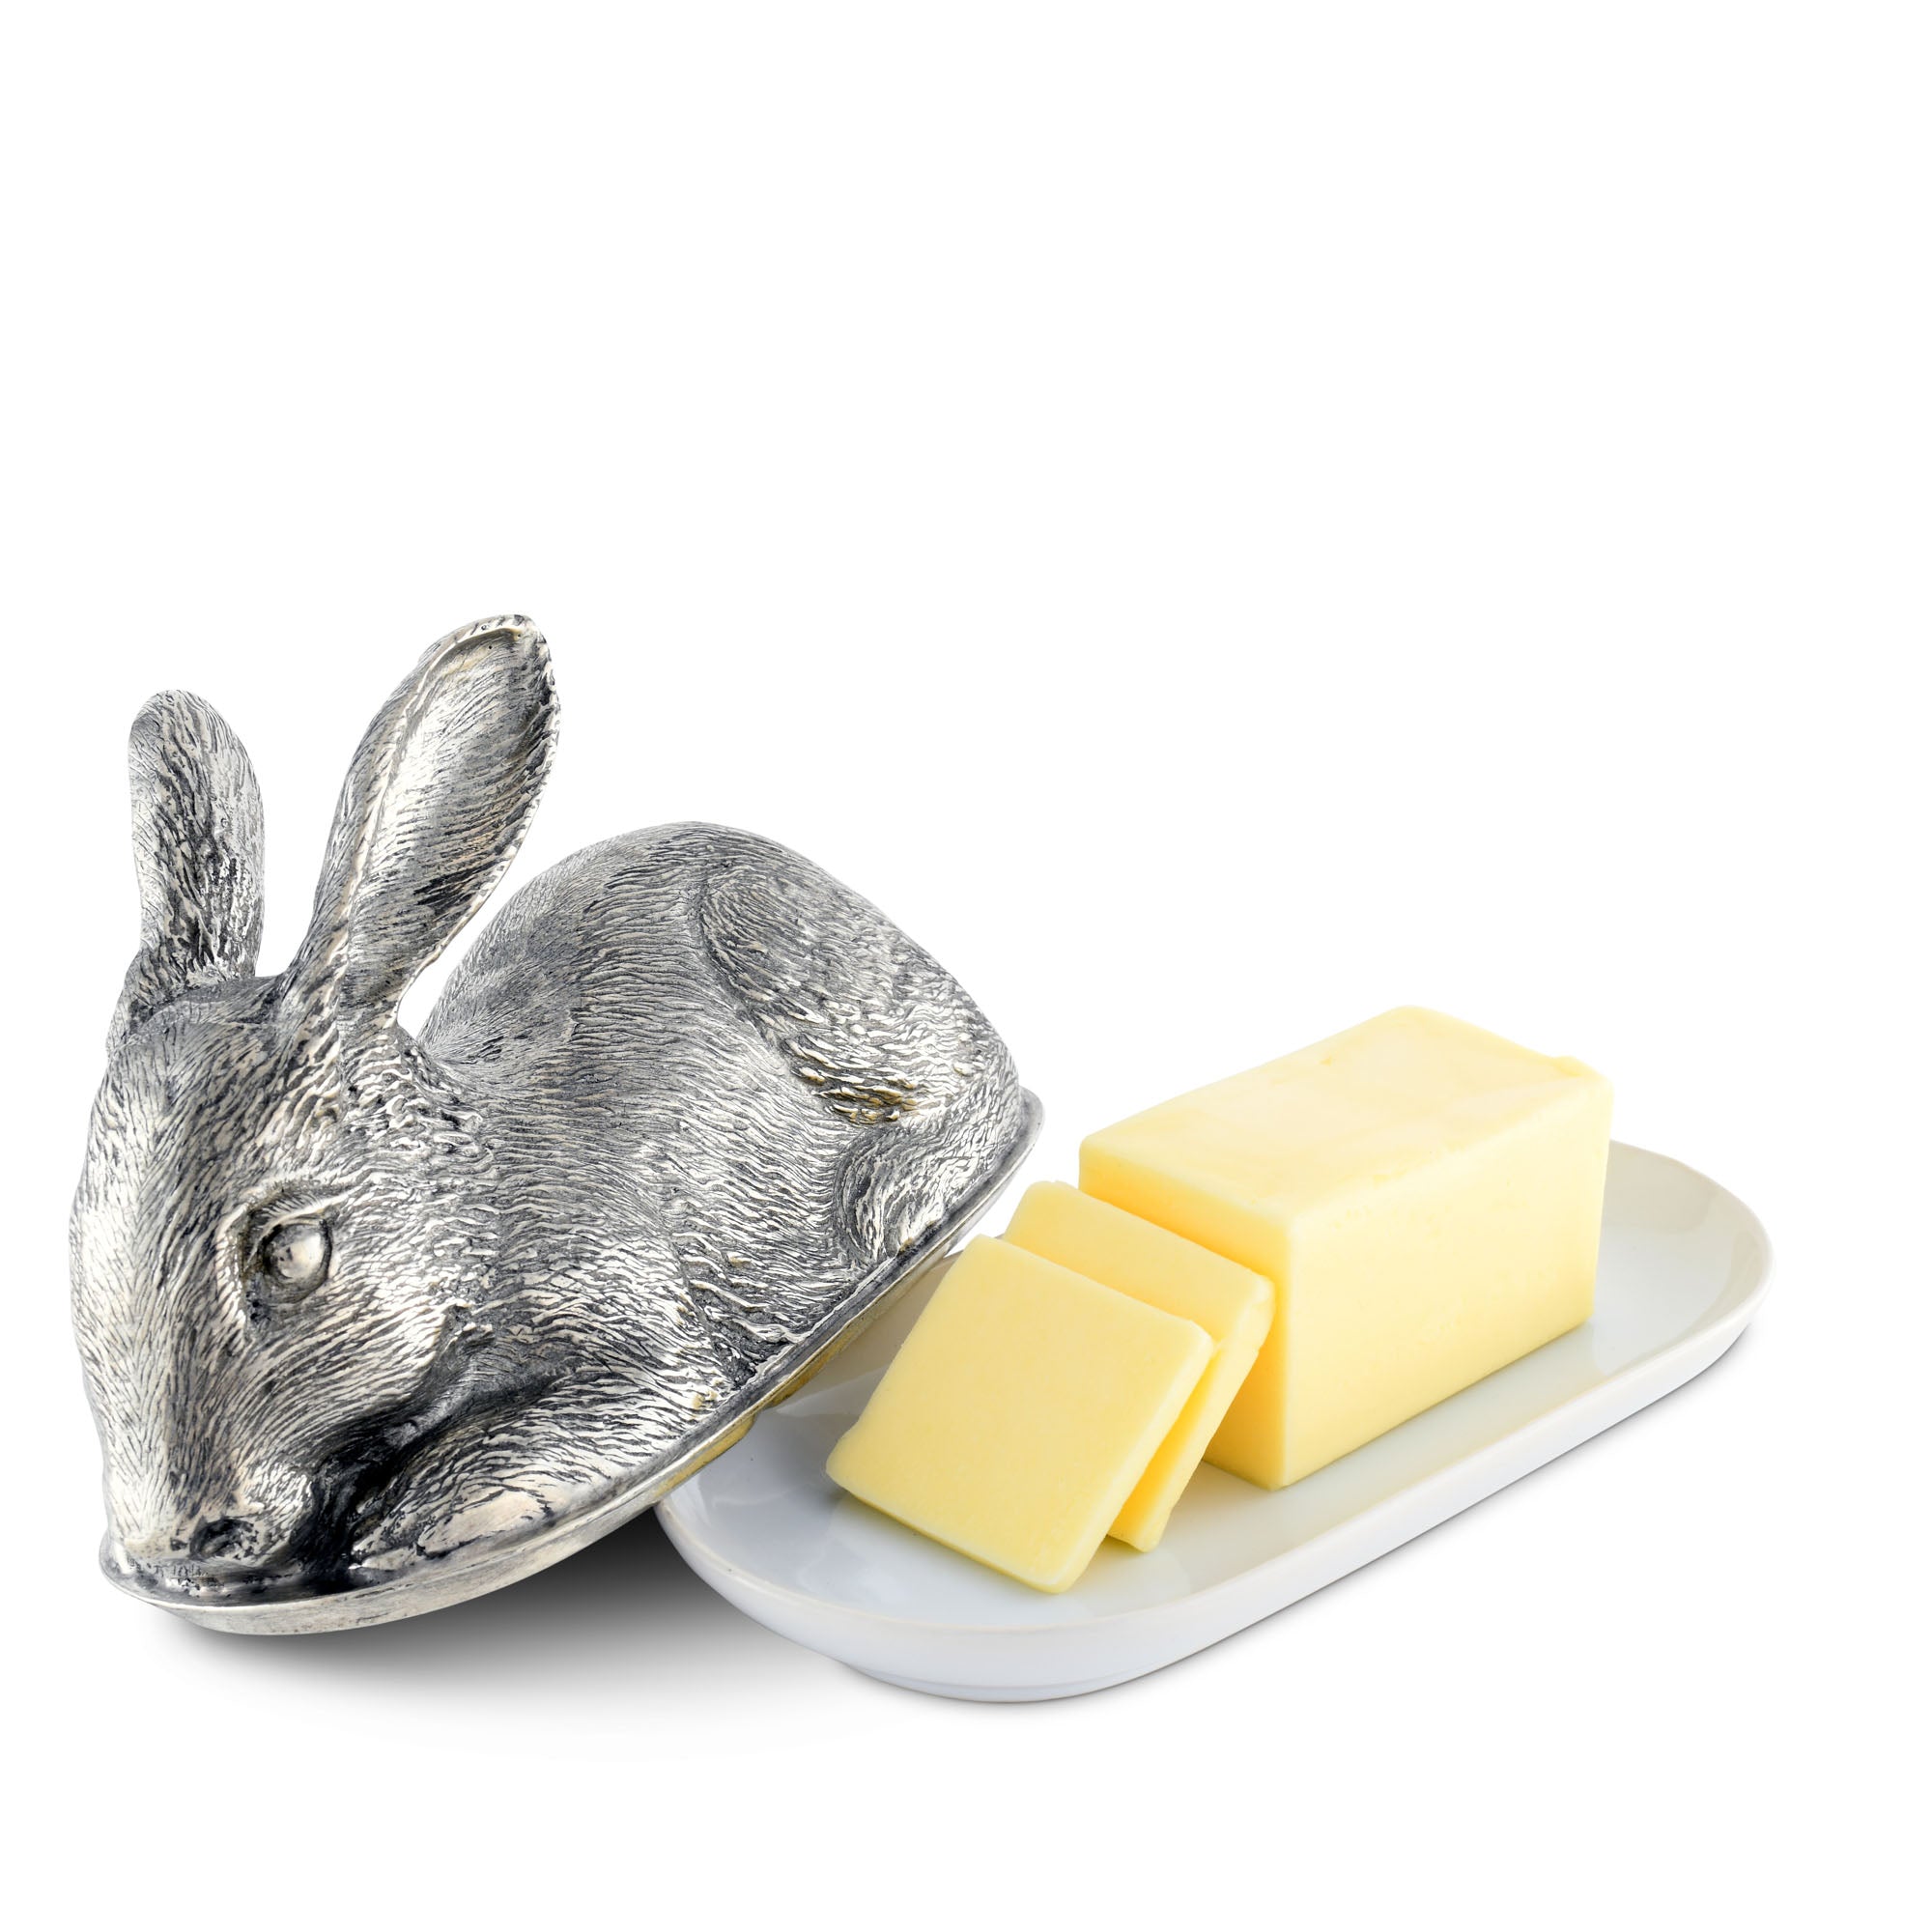 Vagabond House Pewter Rabbit Butter Dish Product Image